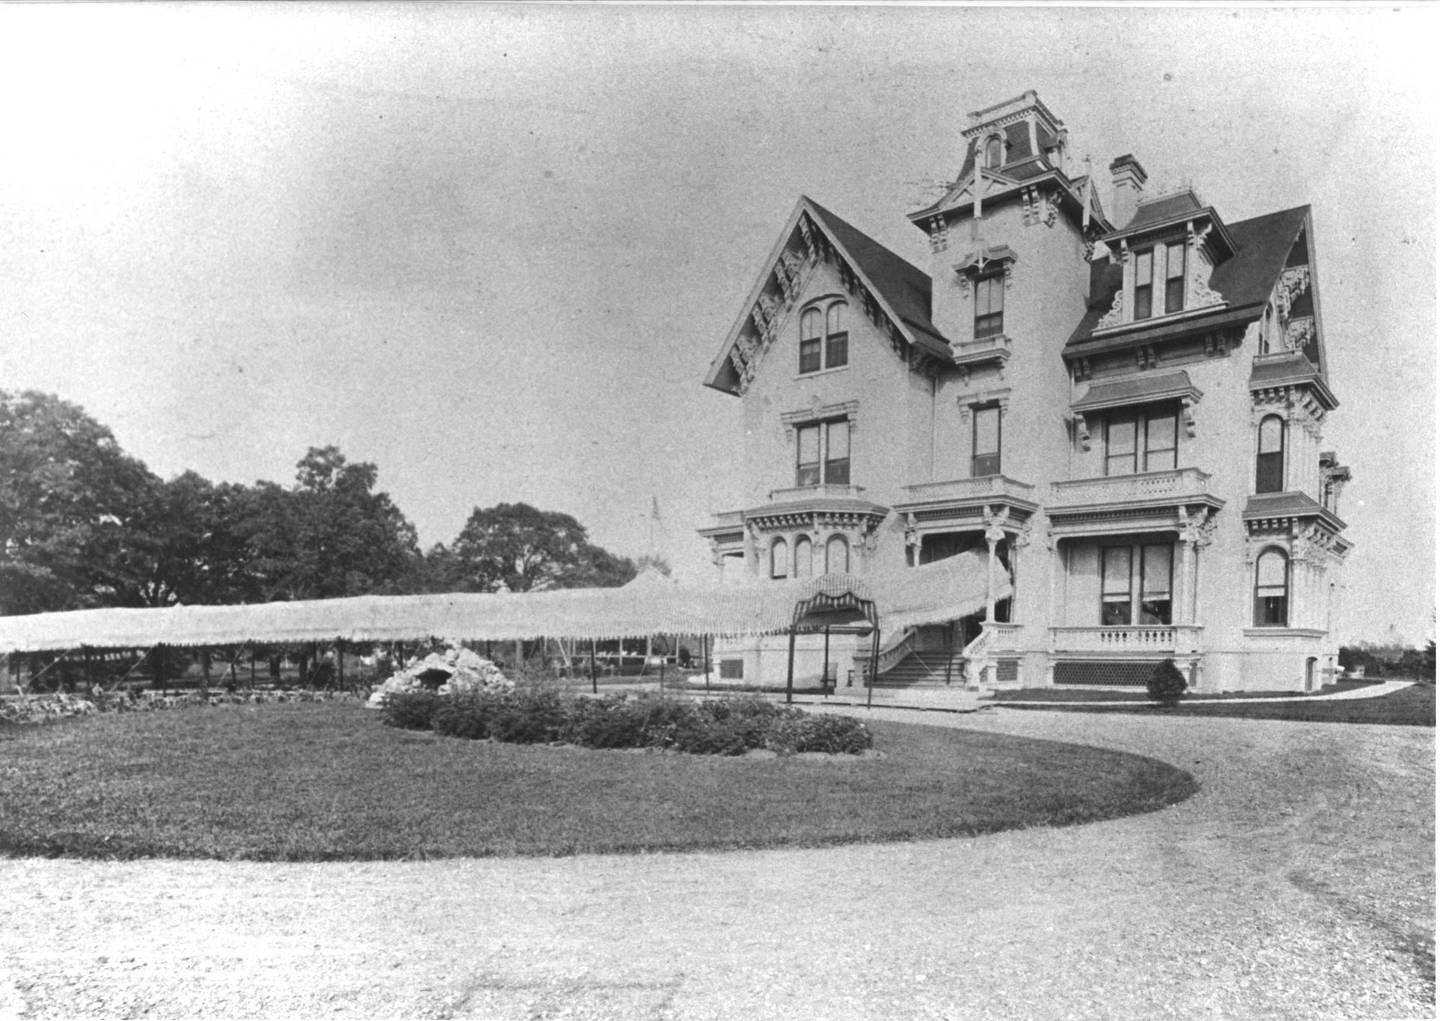 A photo of the Dole Mansion taken from the 1883 wedding of Mary Florence Dole to Albert Chandler Stowell.  The ceremony and reception were held at the mansion.